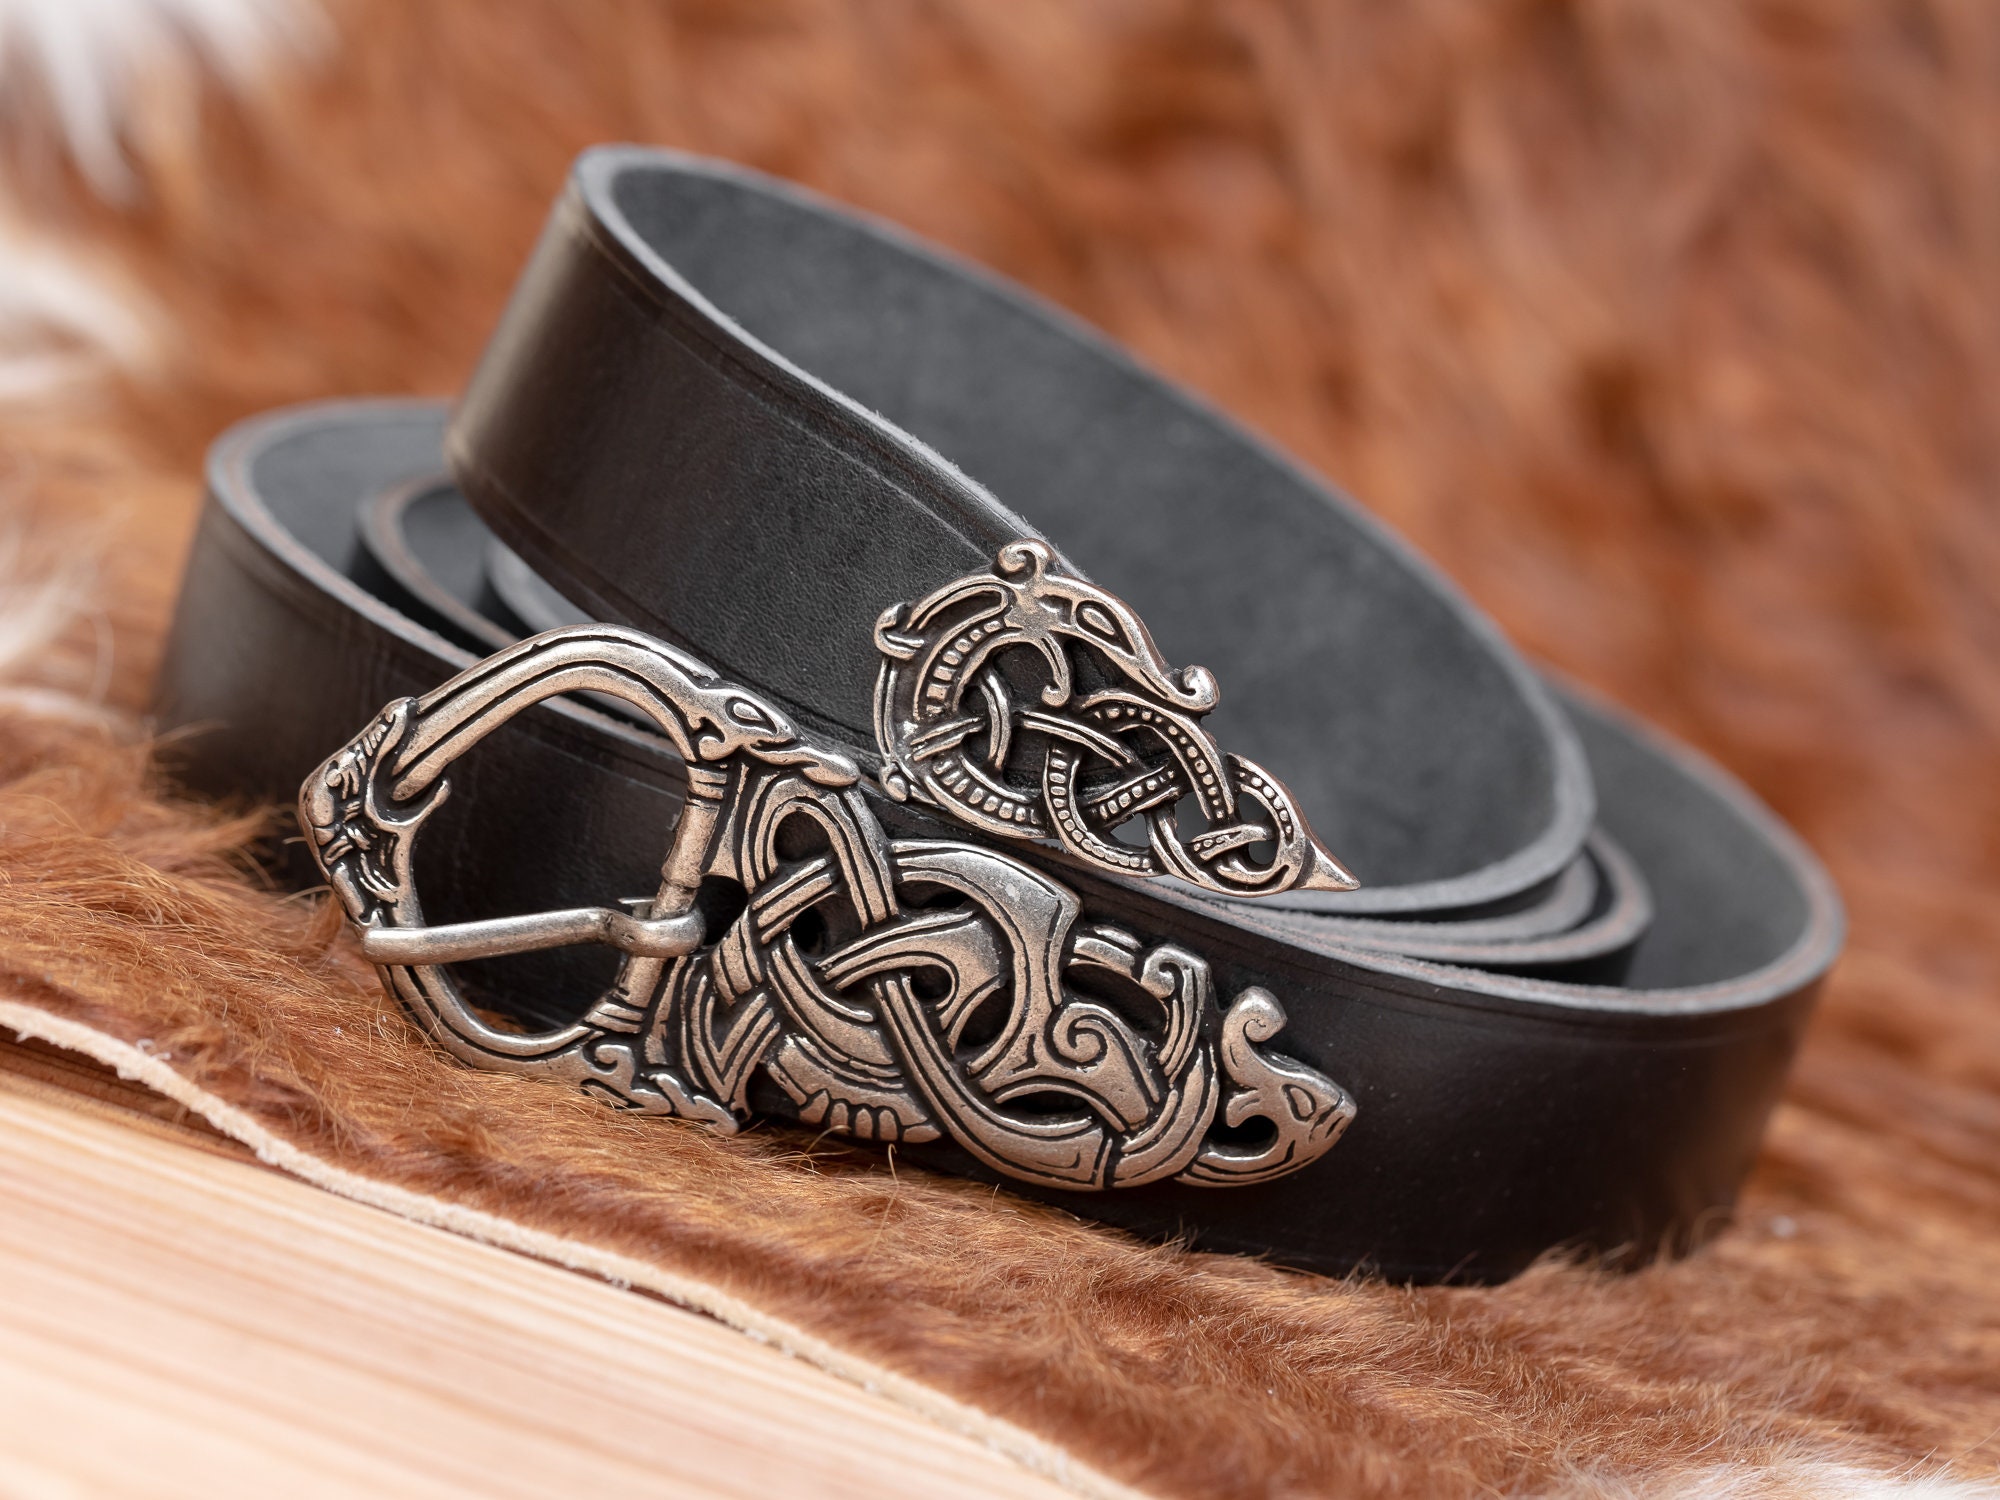 Swedish Viking Belt - Artifact Replica from Sweden | Leather Belts Brown and Bronze